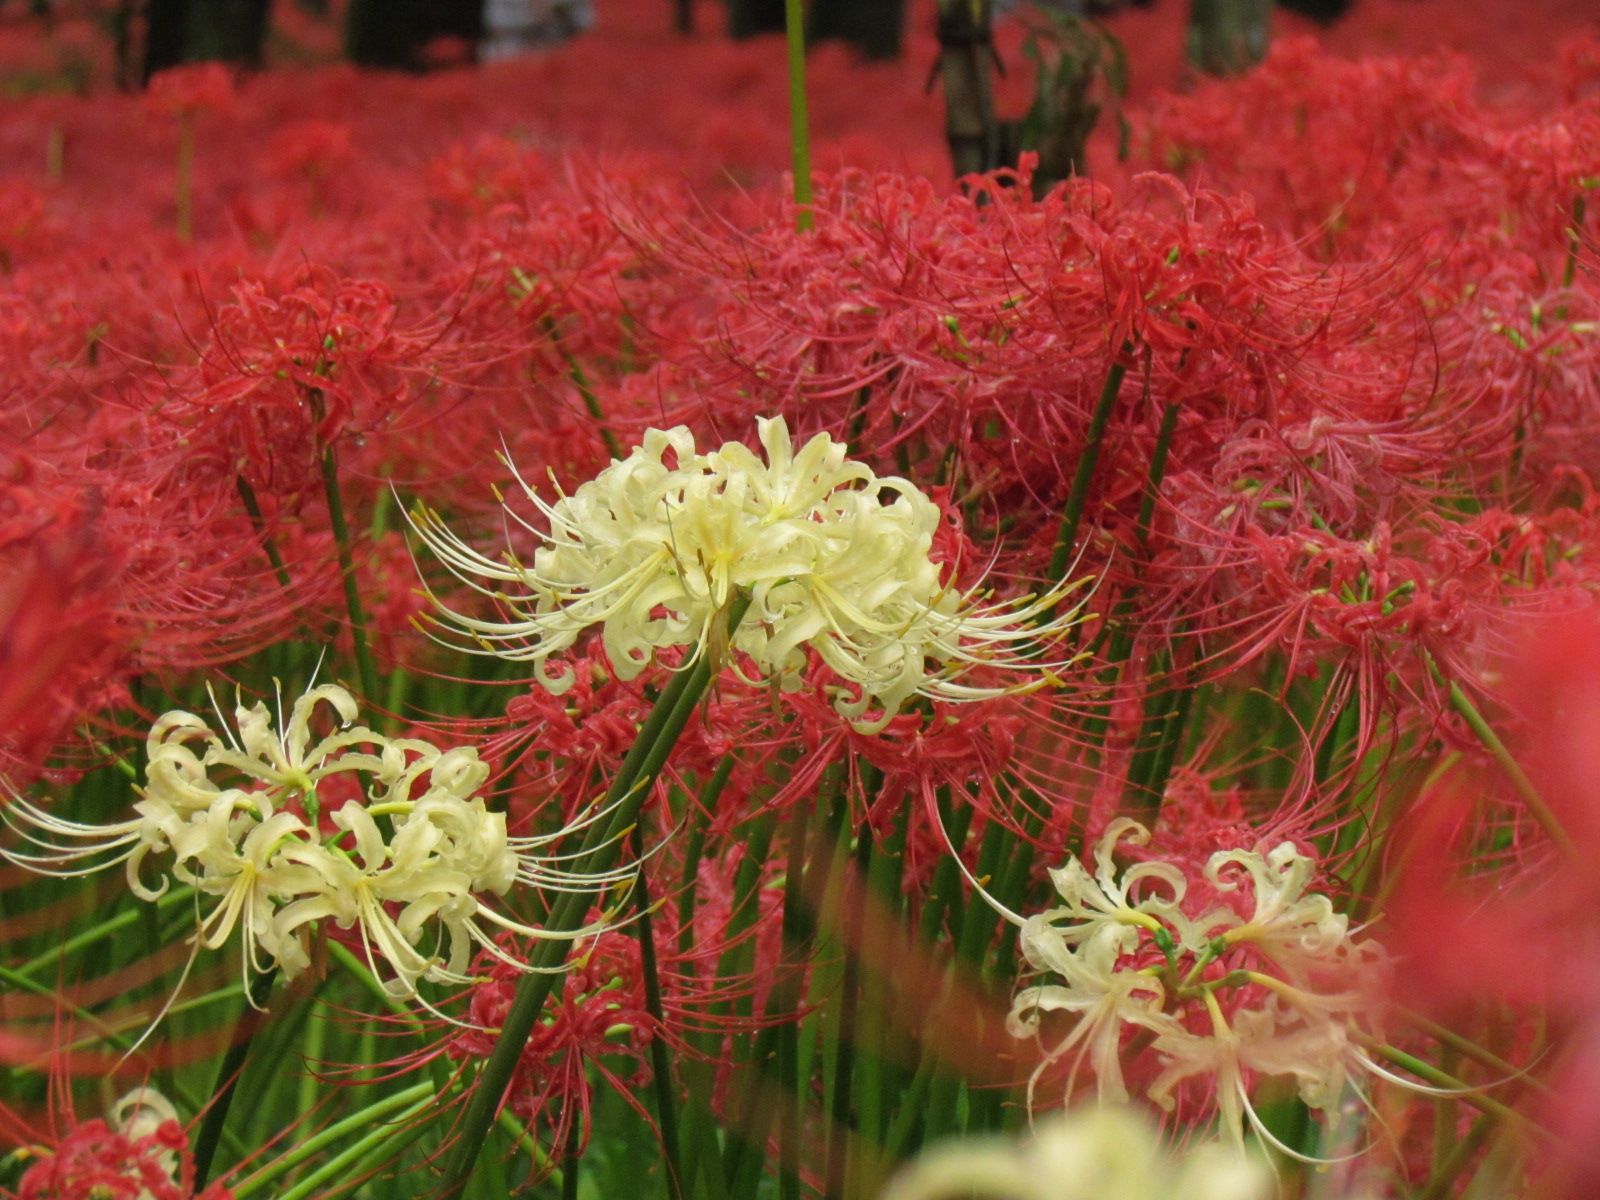 Surrounded by Five Million Red Spider Lilies Biking